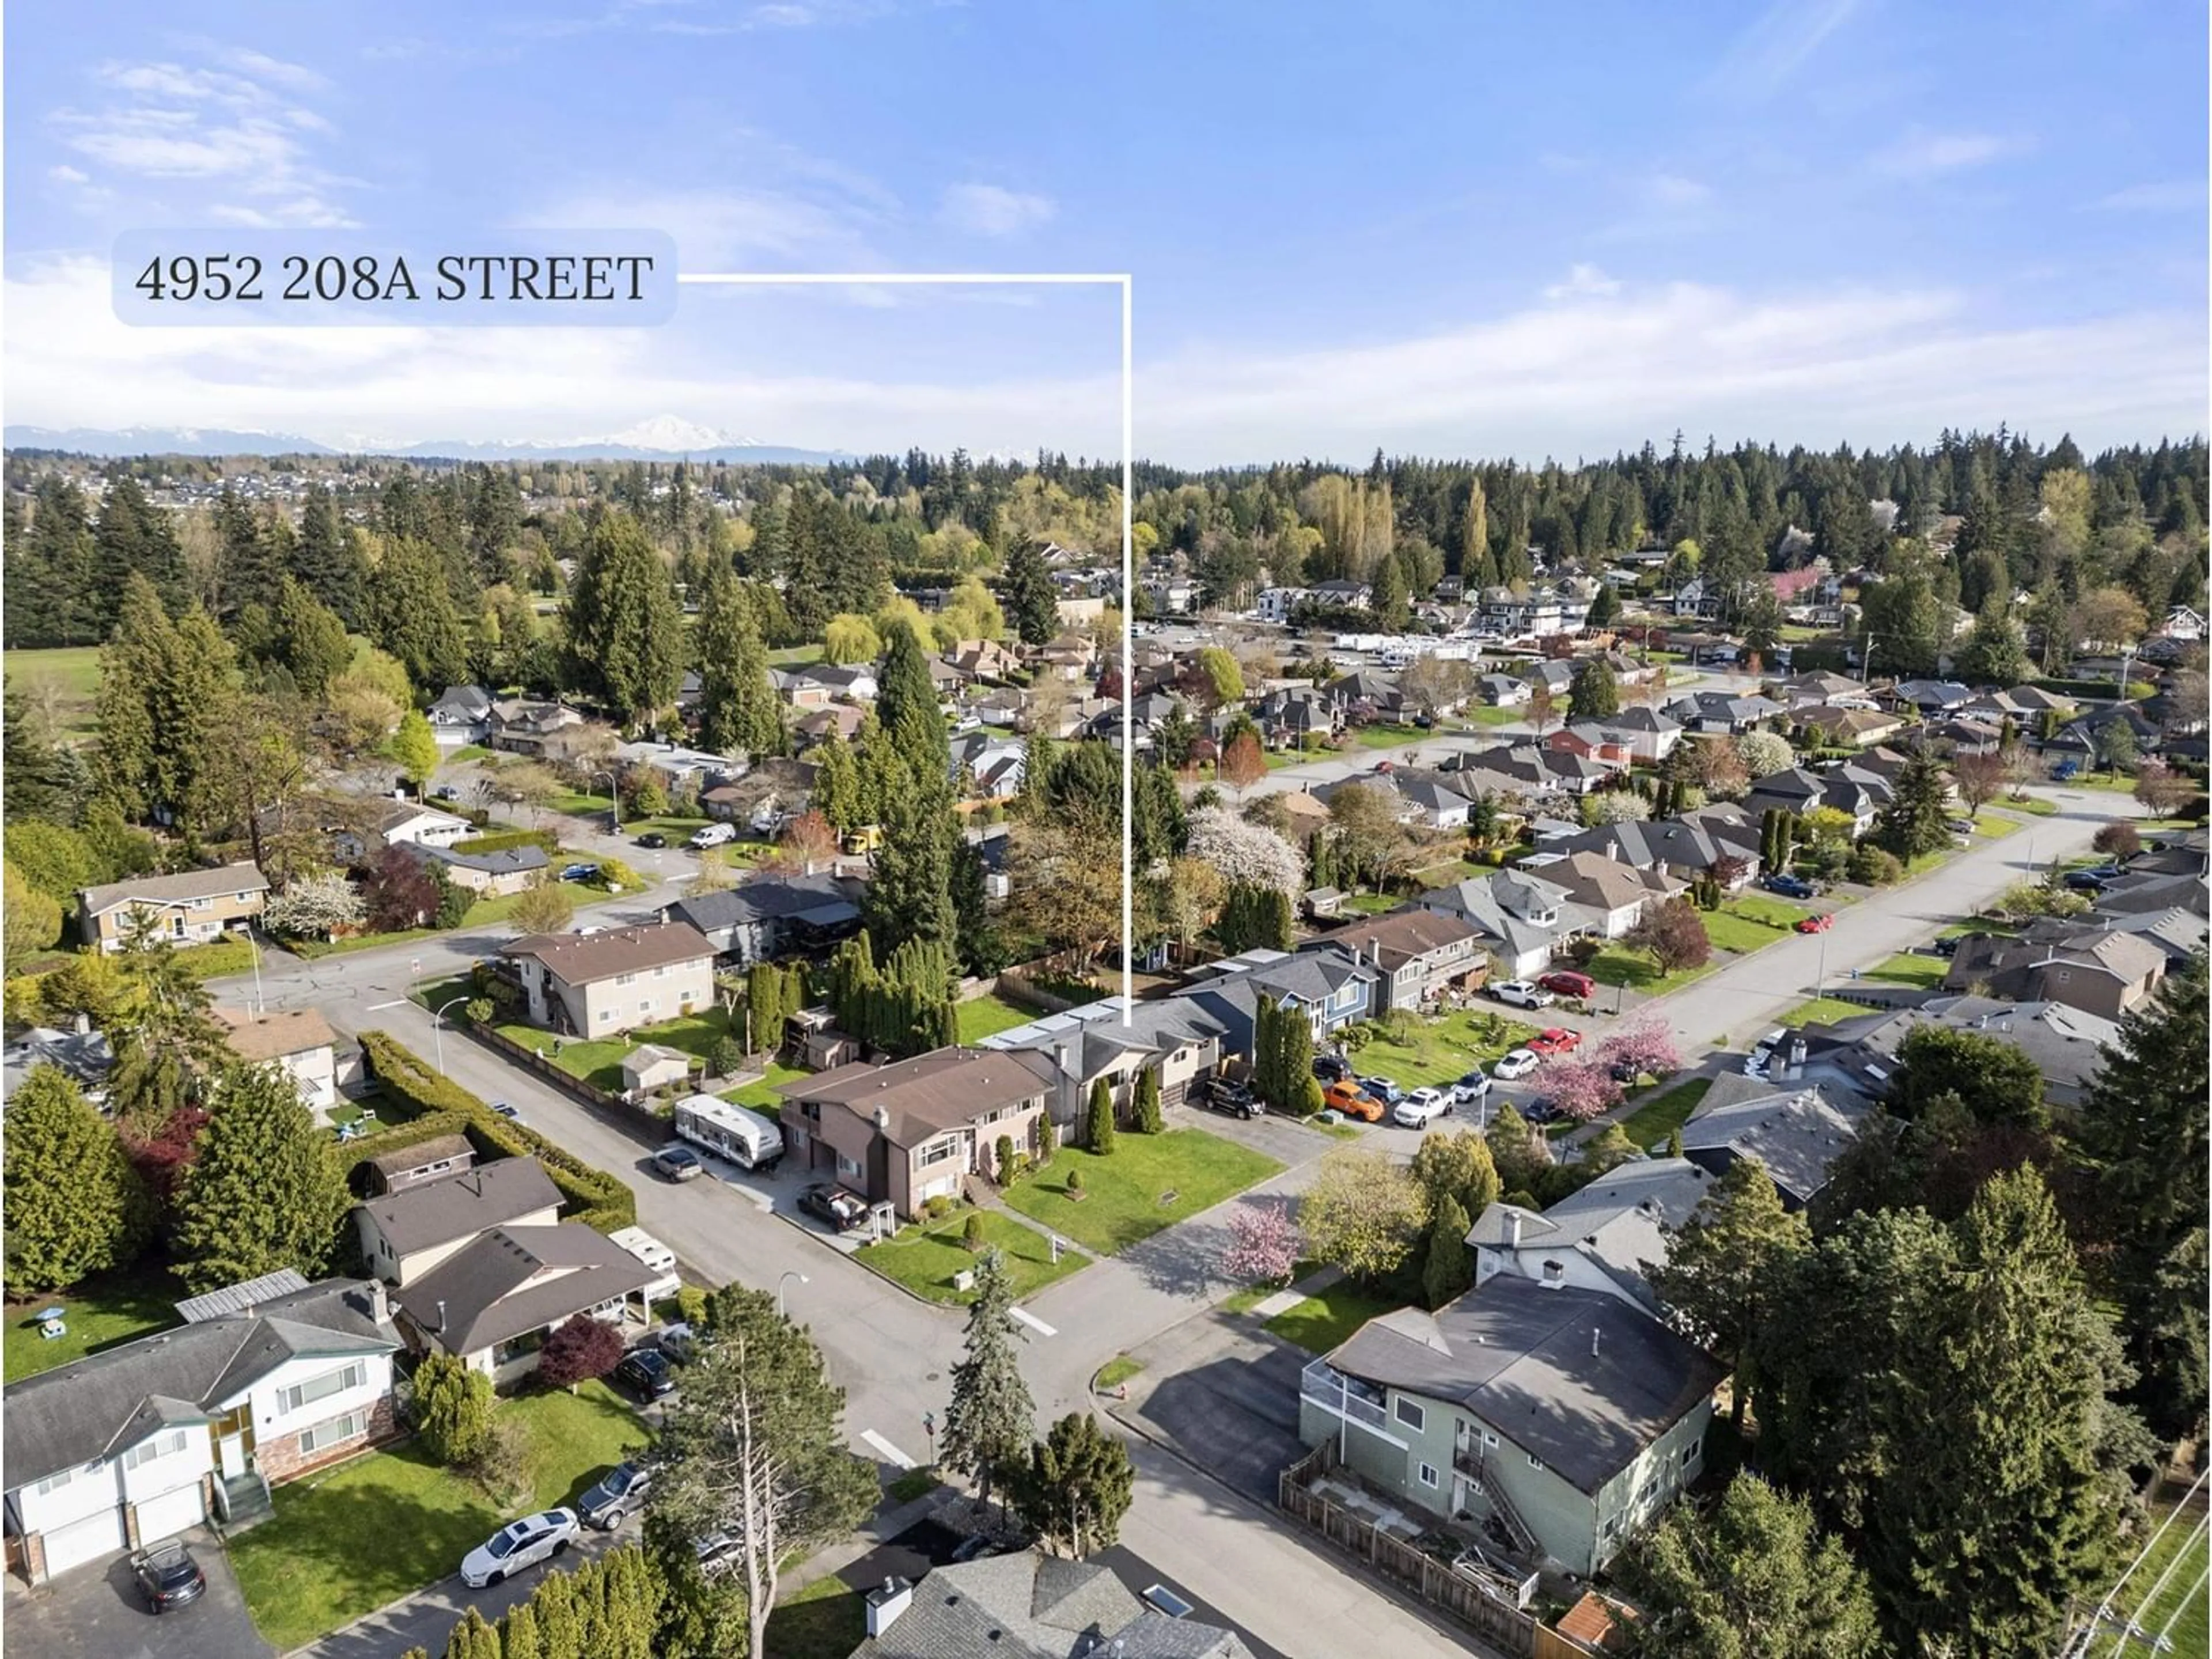 Street view for 4952 208A STREET, Langley British Columbia V3A5T1